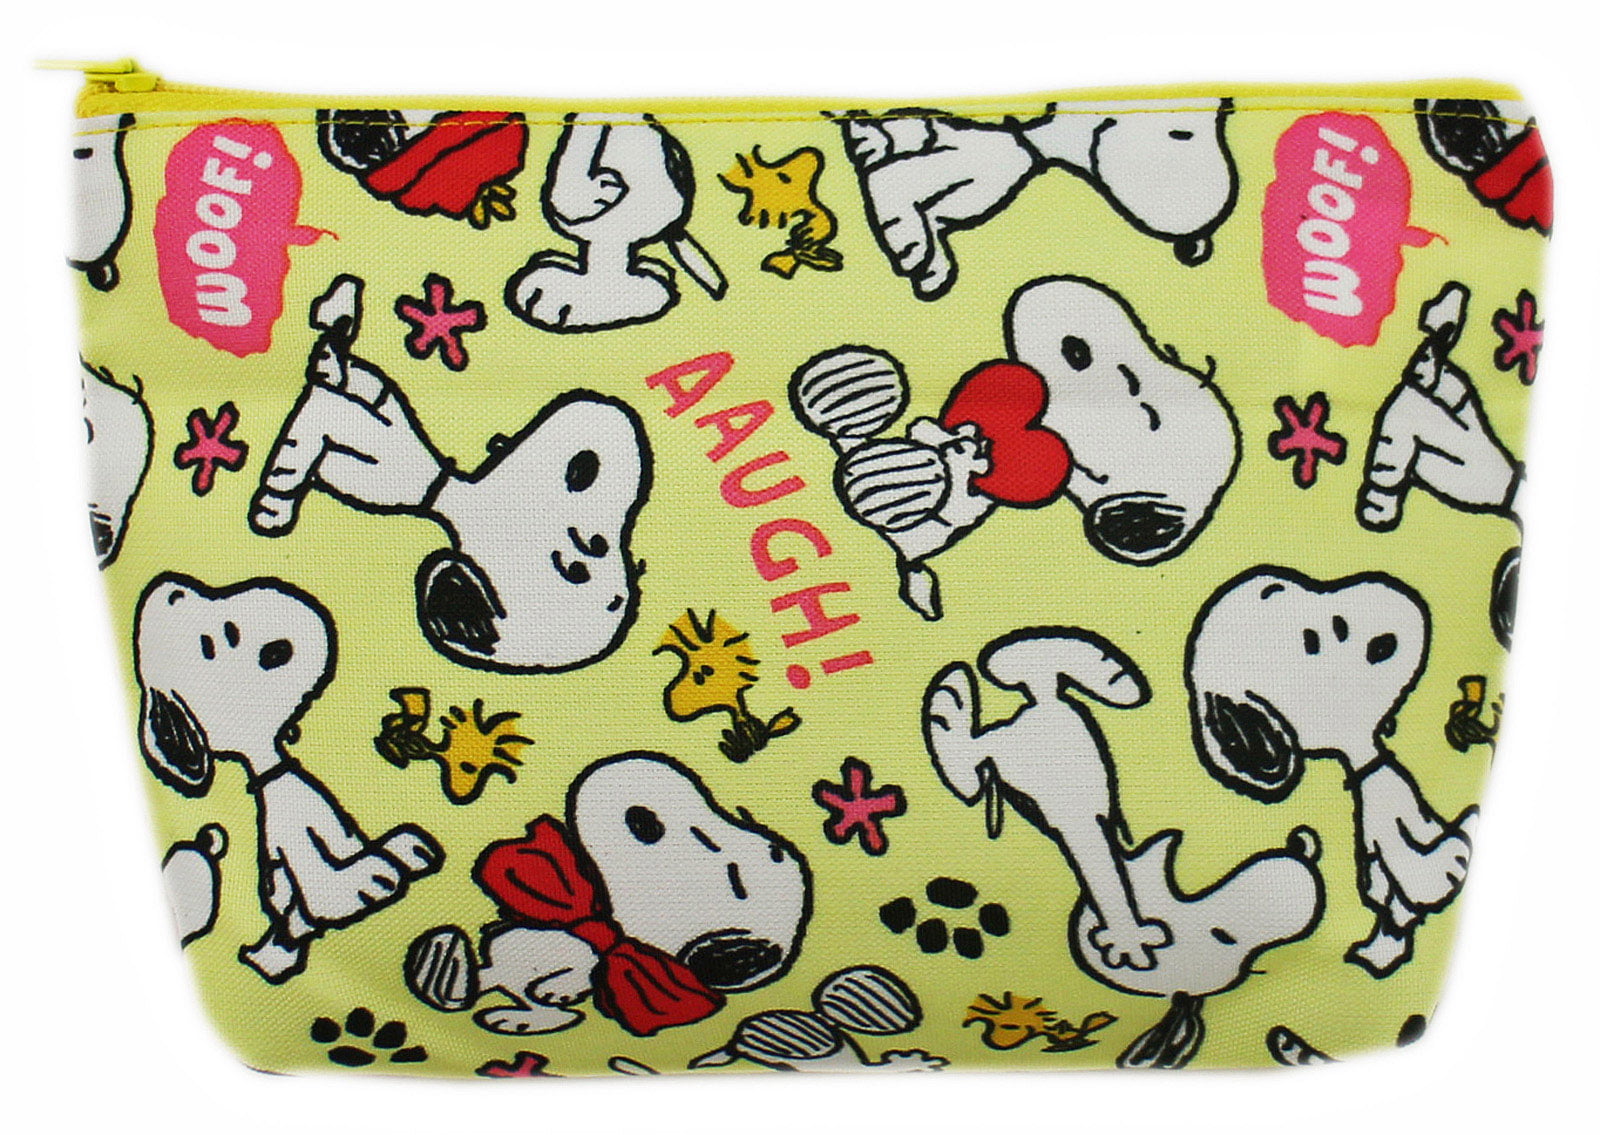 Snoopy and Woodstock Yellow Colored Canvas Material Cosmetic Bag ...